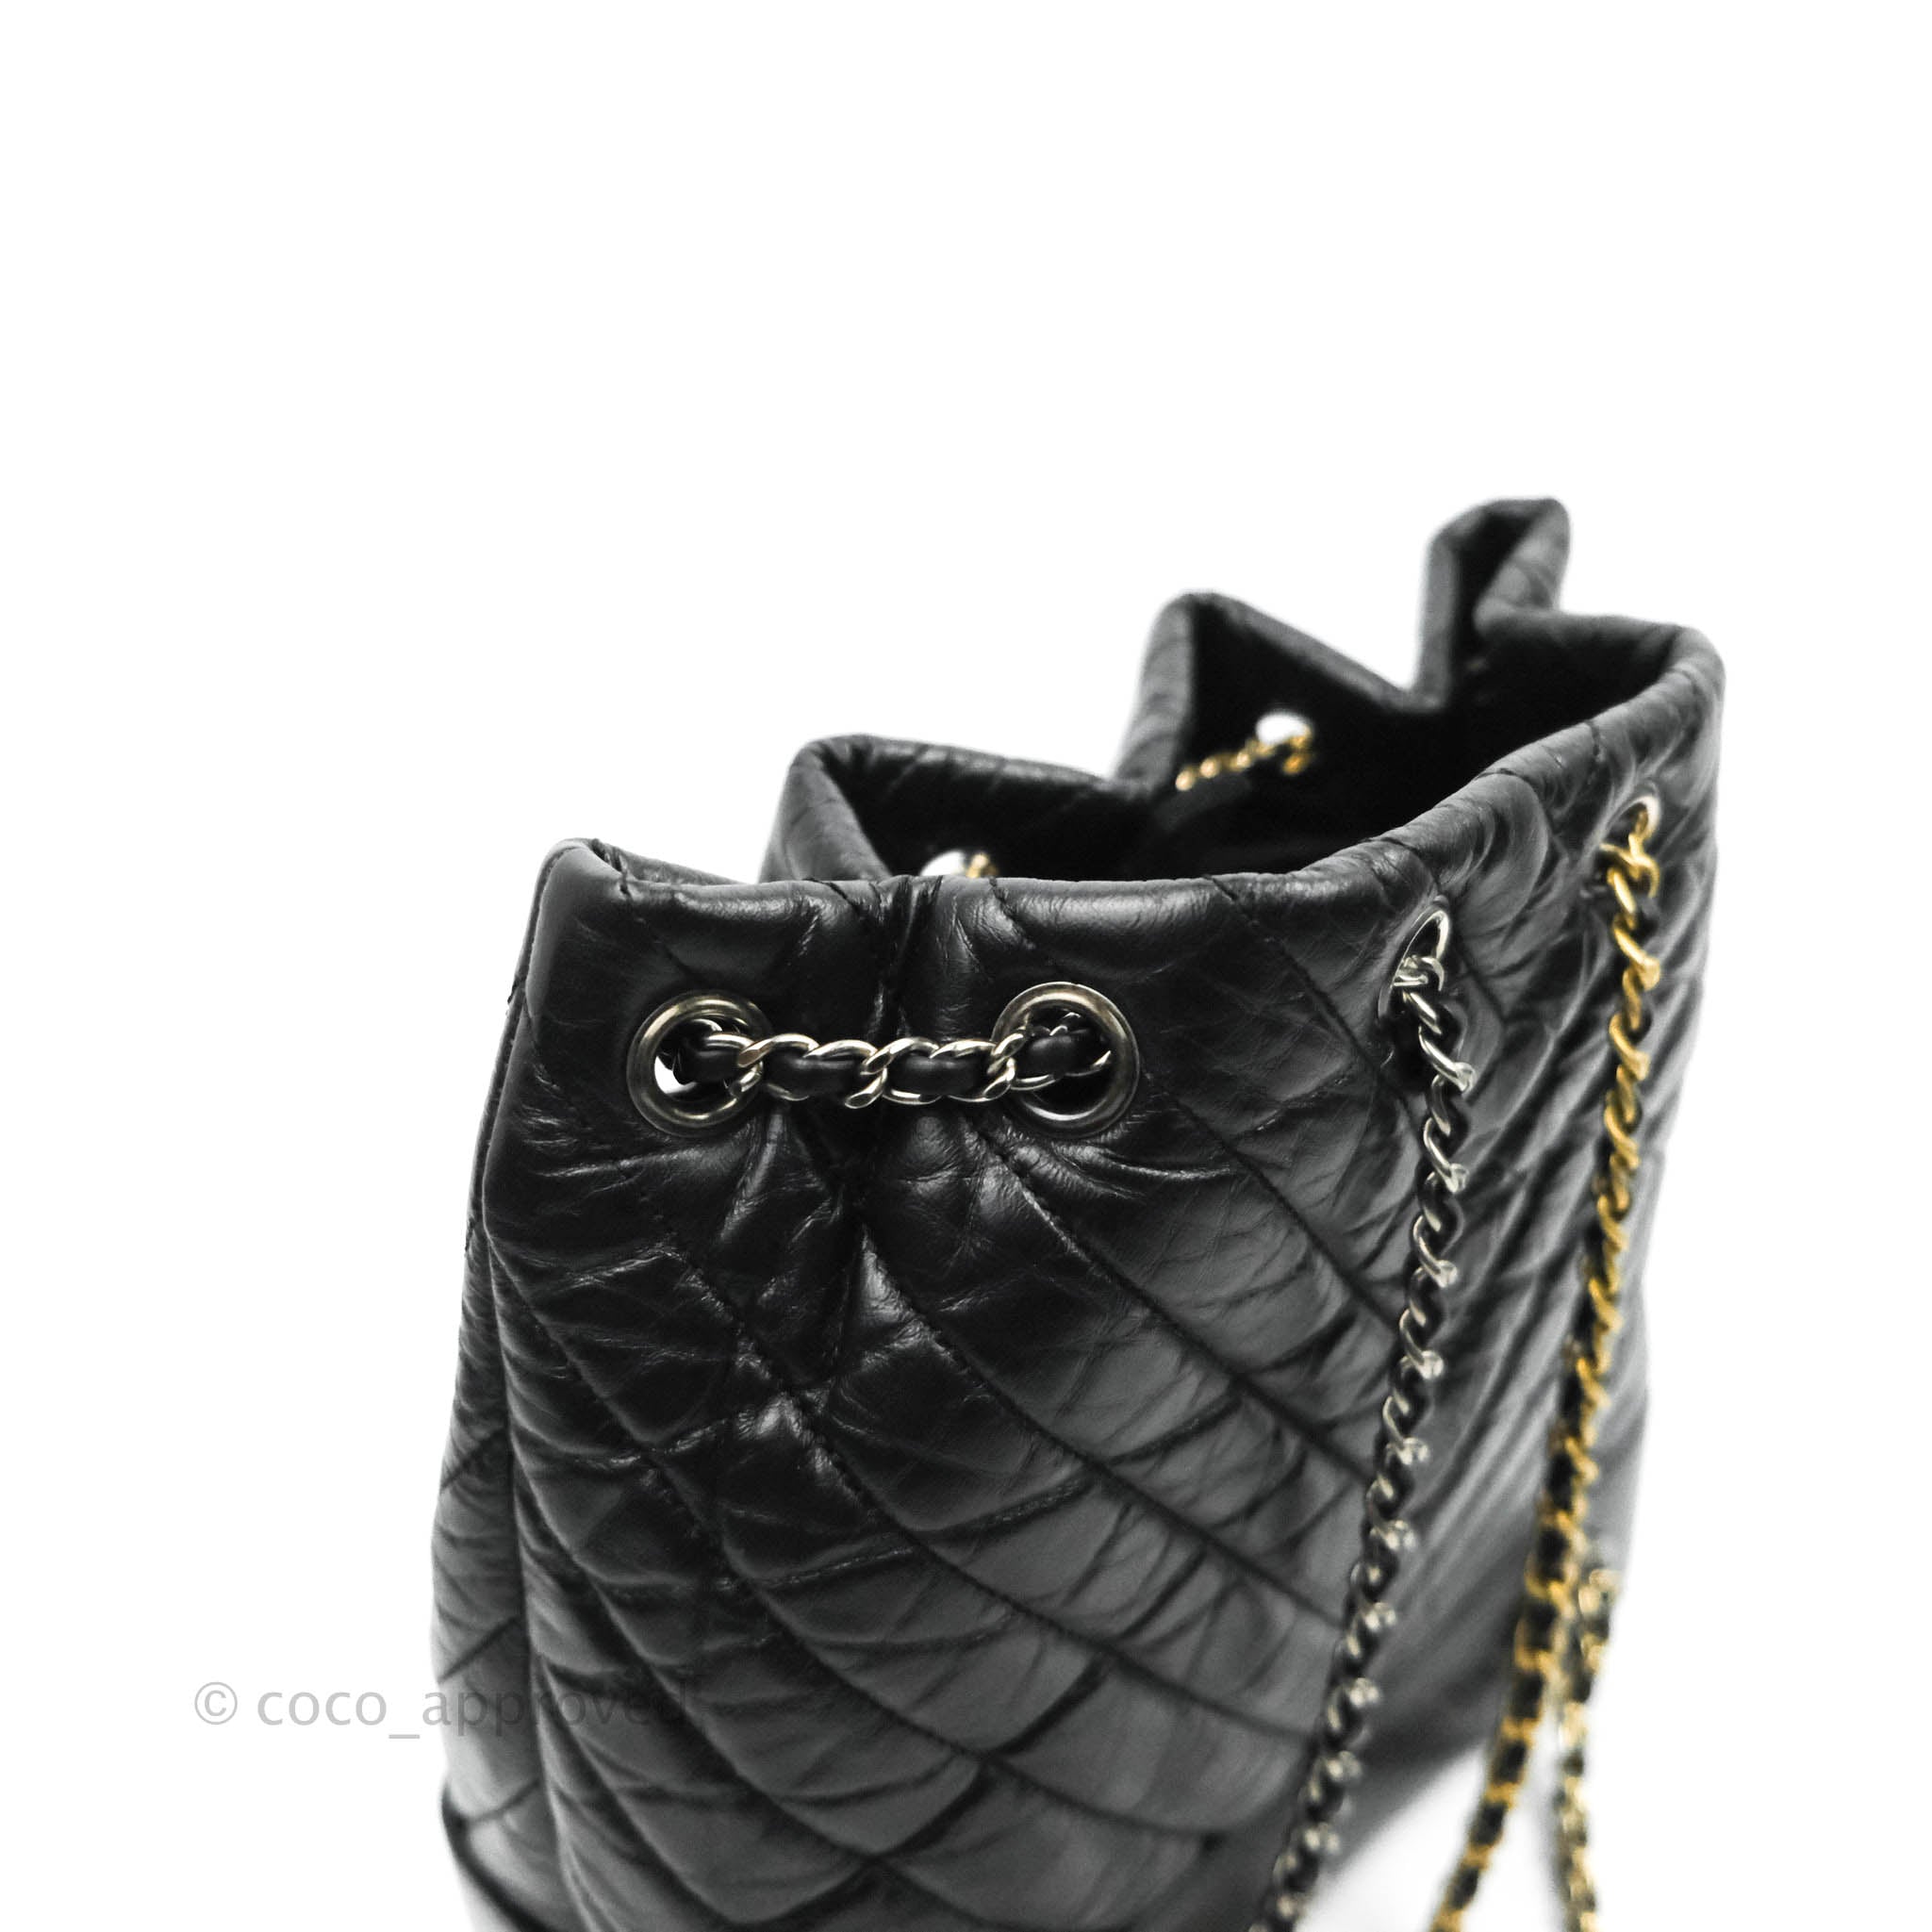 Chanel Chevron Small Gabrielle Backpack Black Aged Calfskin – Coco Approved  Studio